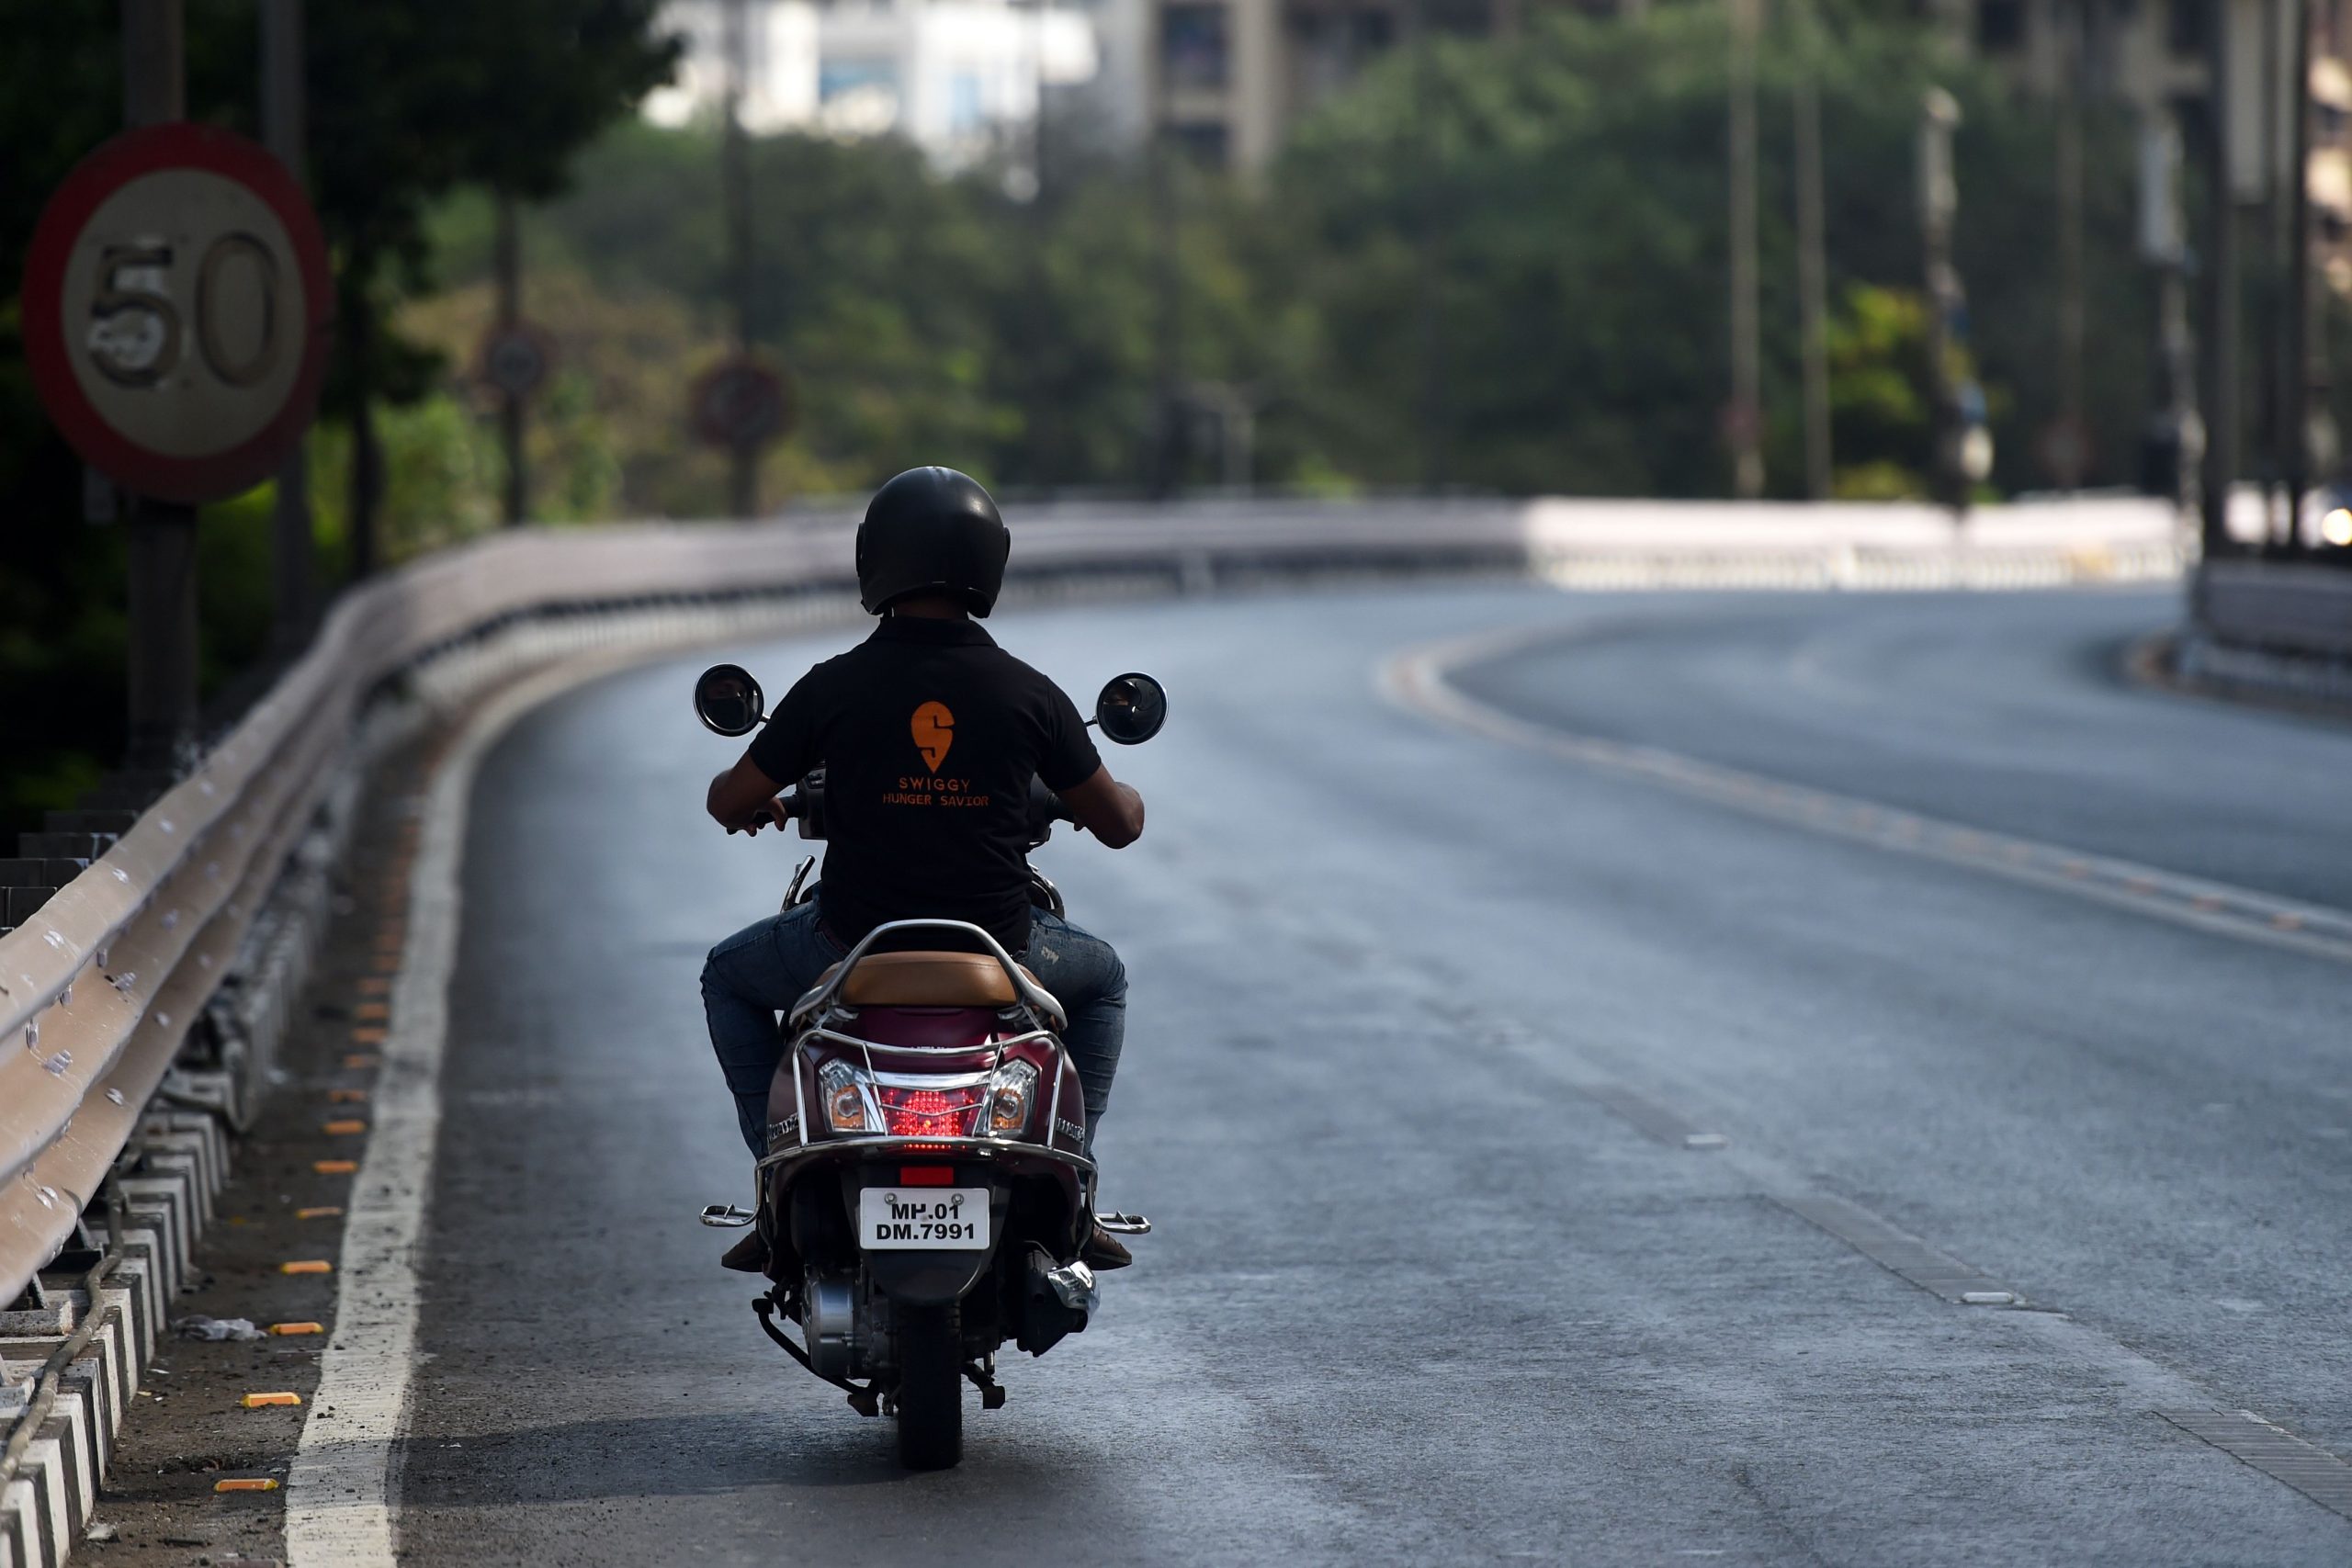 Swiggy expands alcohol delivery to West Bengal 25